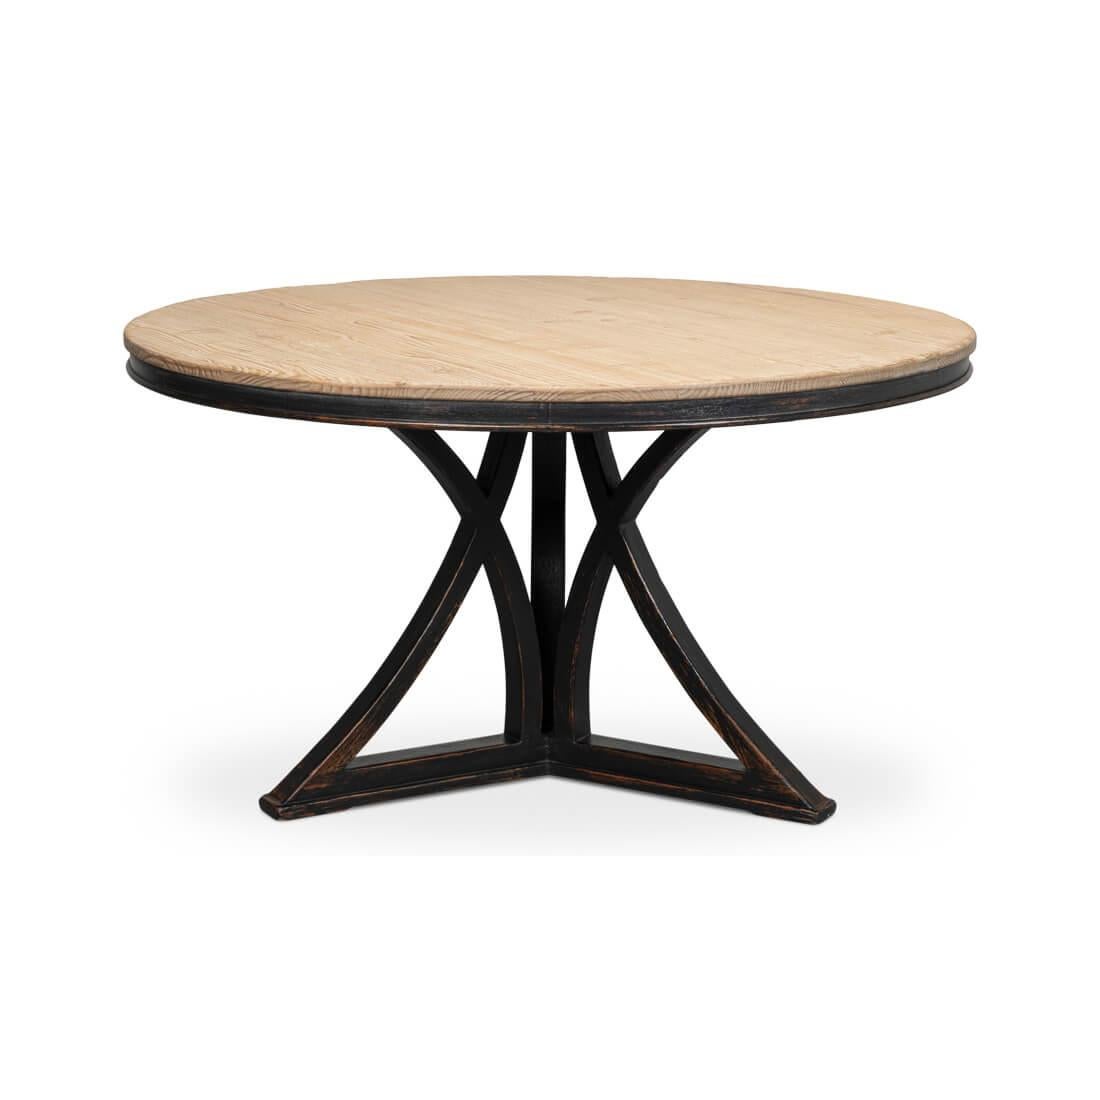 Asian Modern Rustic Round Dining Table - Black For Sale